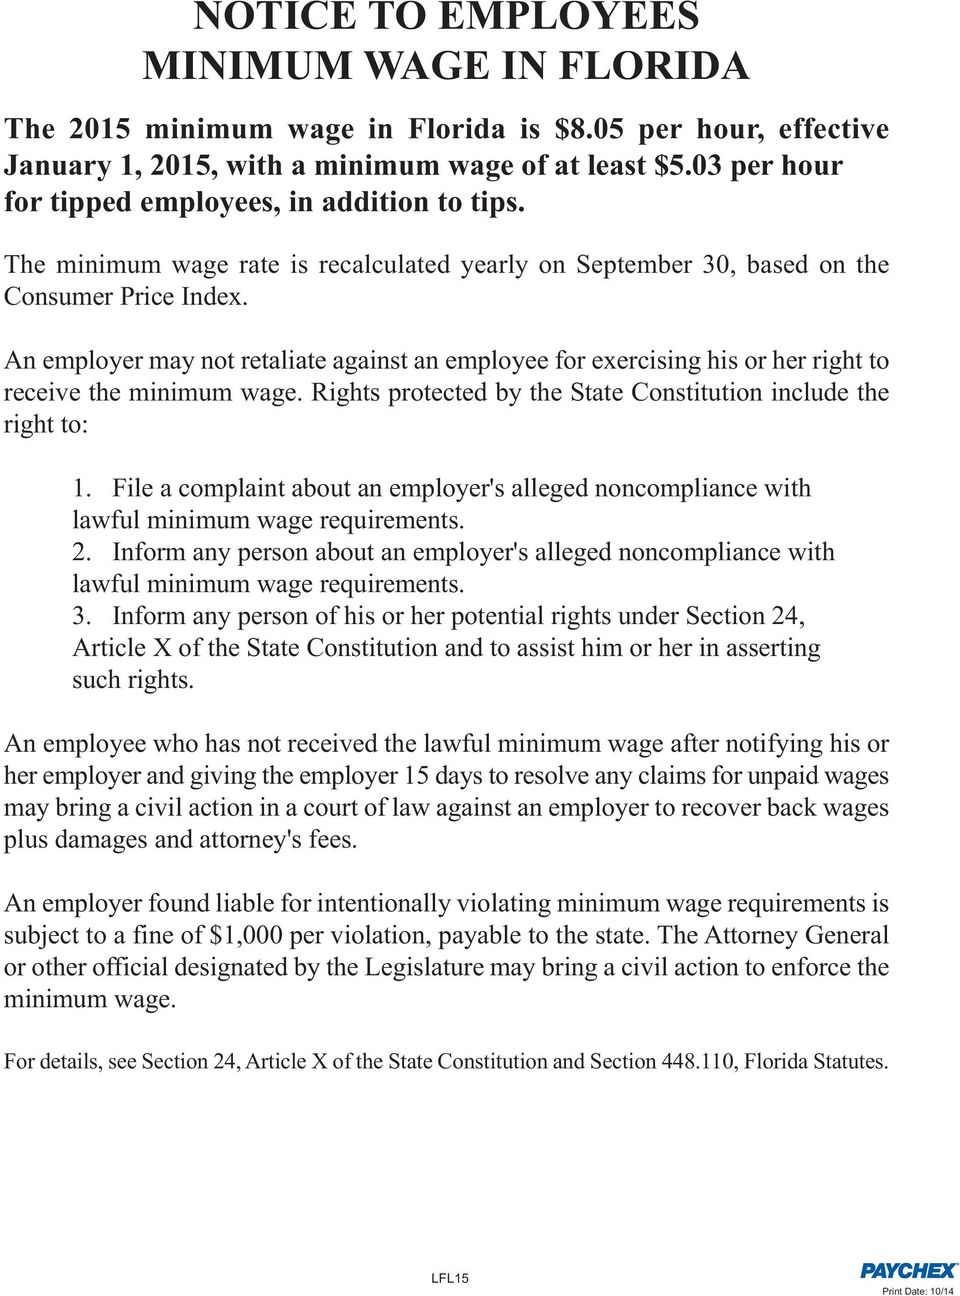 An employer may not retaliate against an employee for exercising his or her right to receive the minimum wage. Rights protected by the State Constitution include the right to: 1.